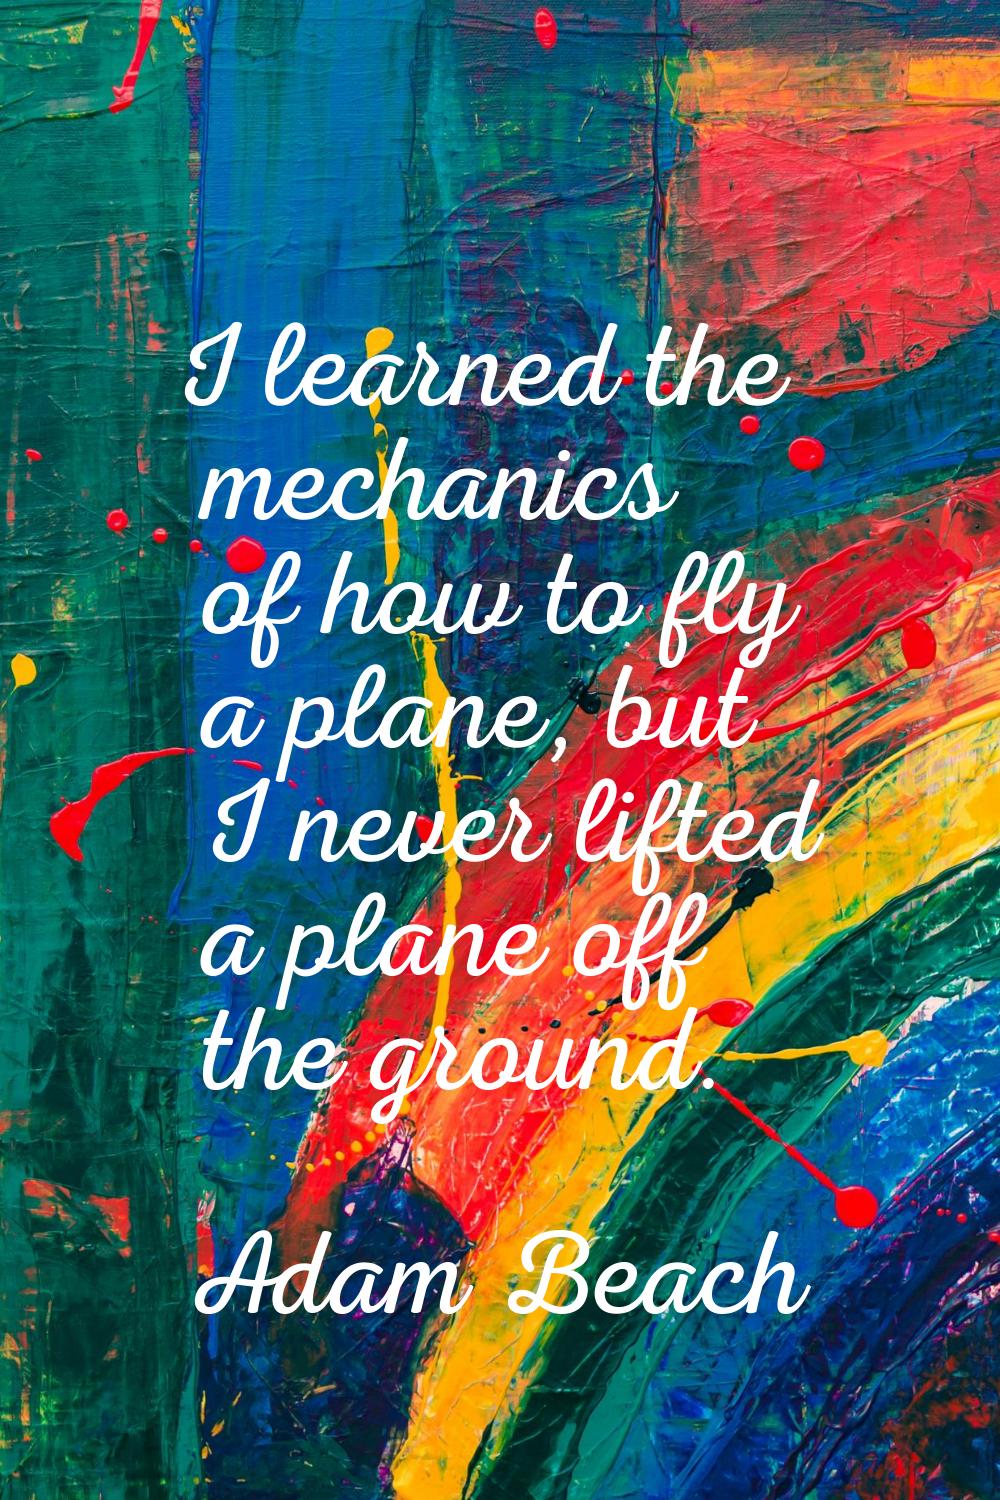 I learned the mechanics of how to fly a plane, but I never lifted a plane off the ground.